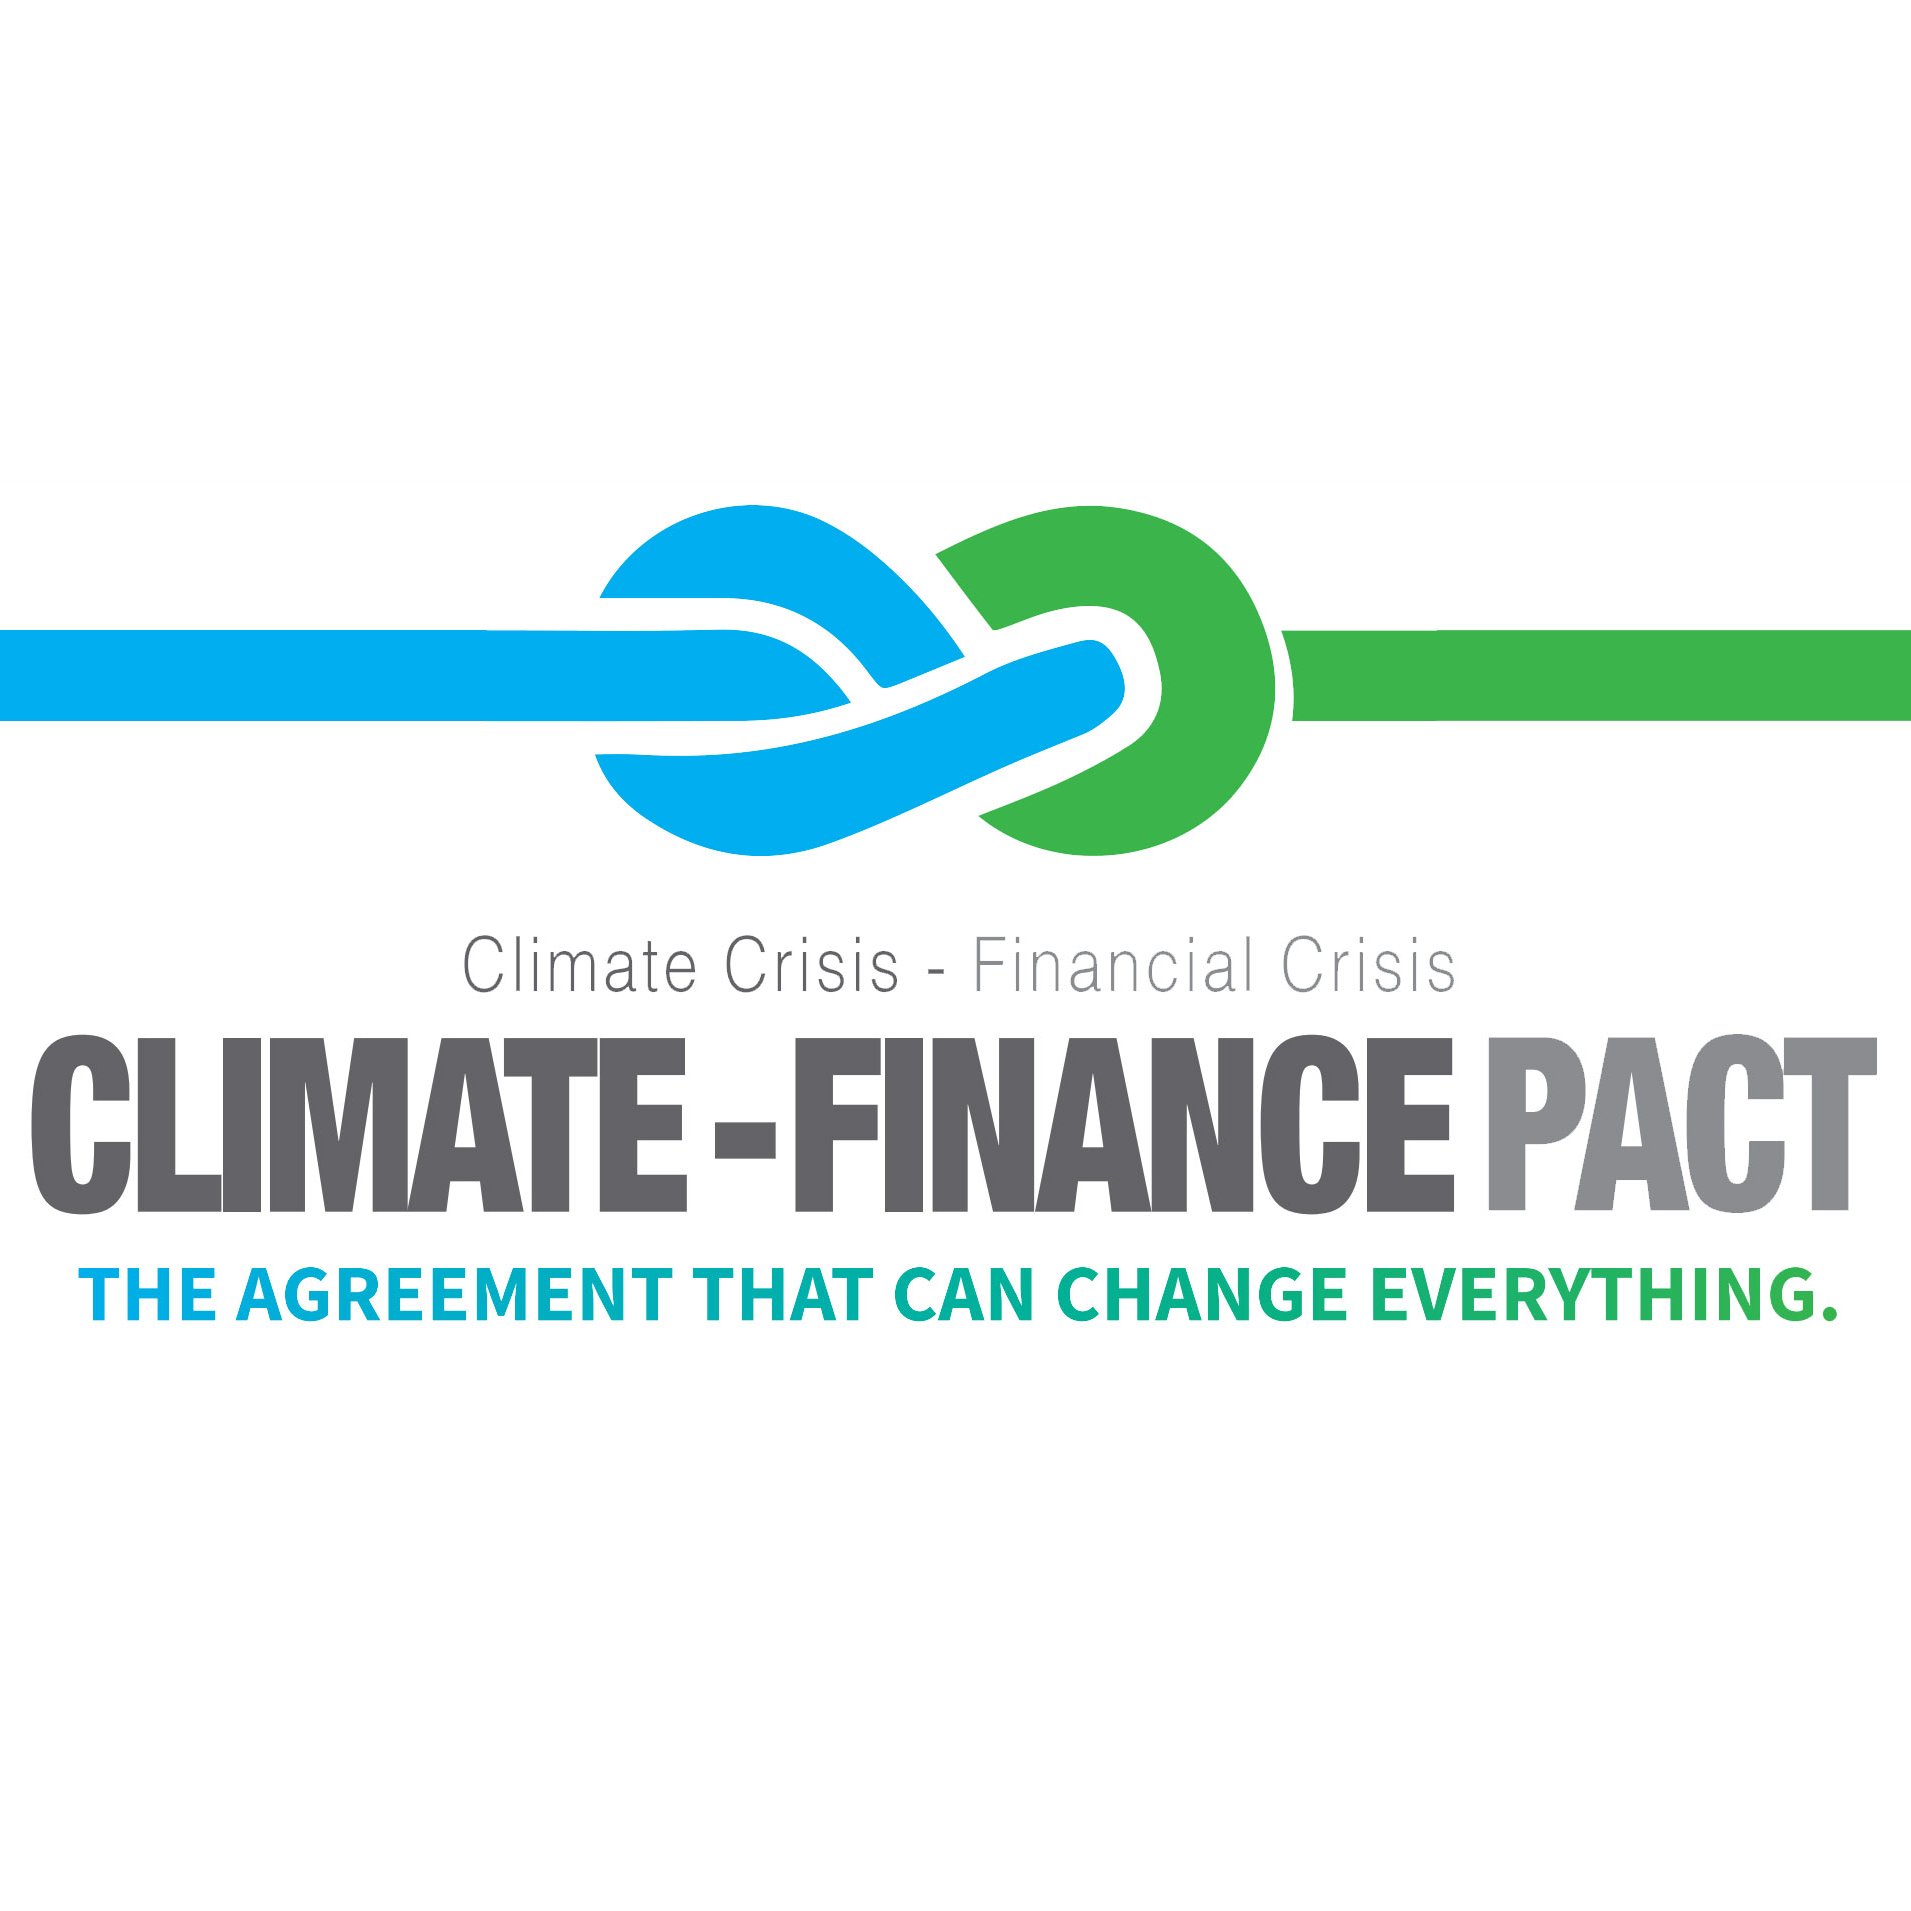 Climate-Finance Pact